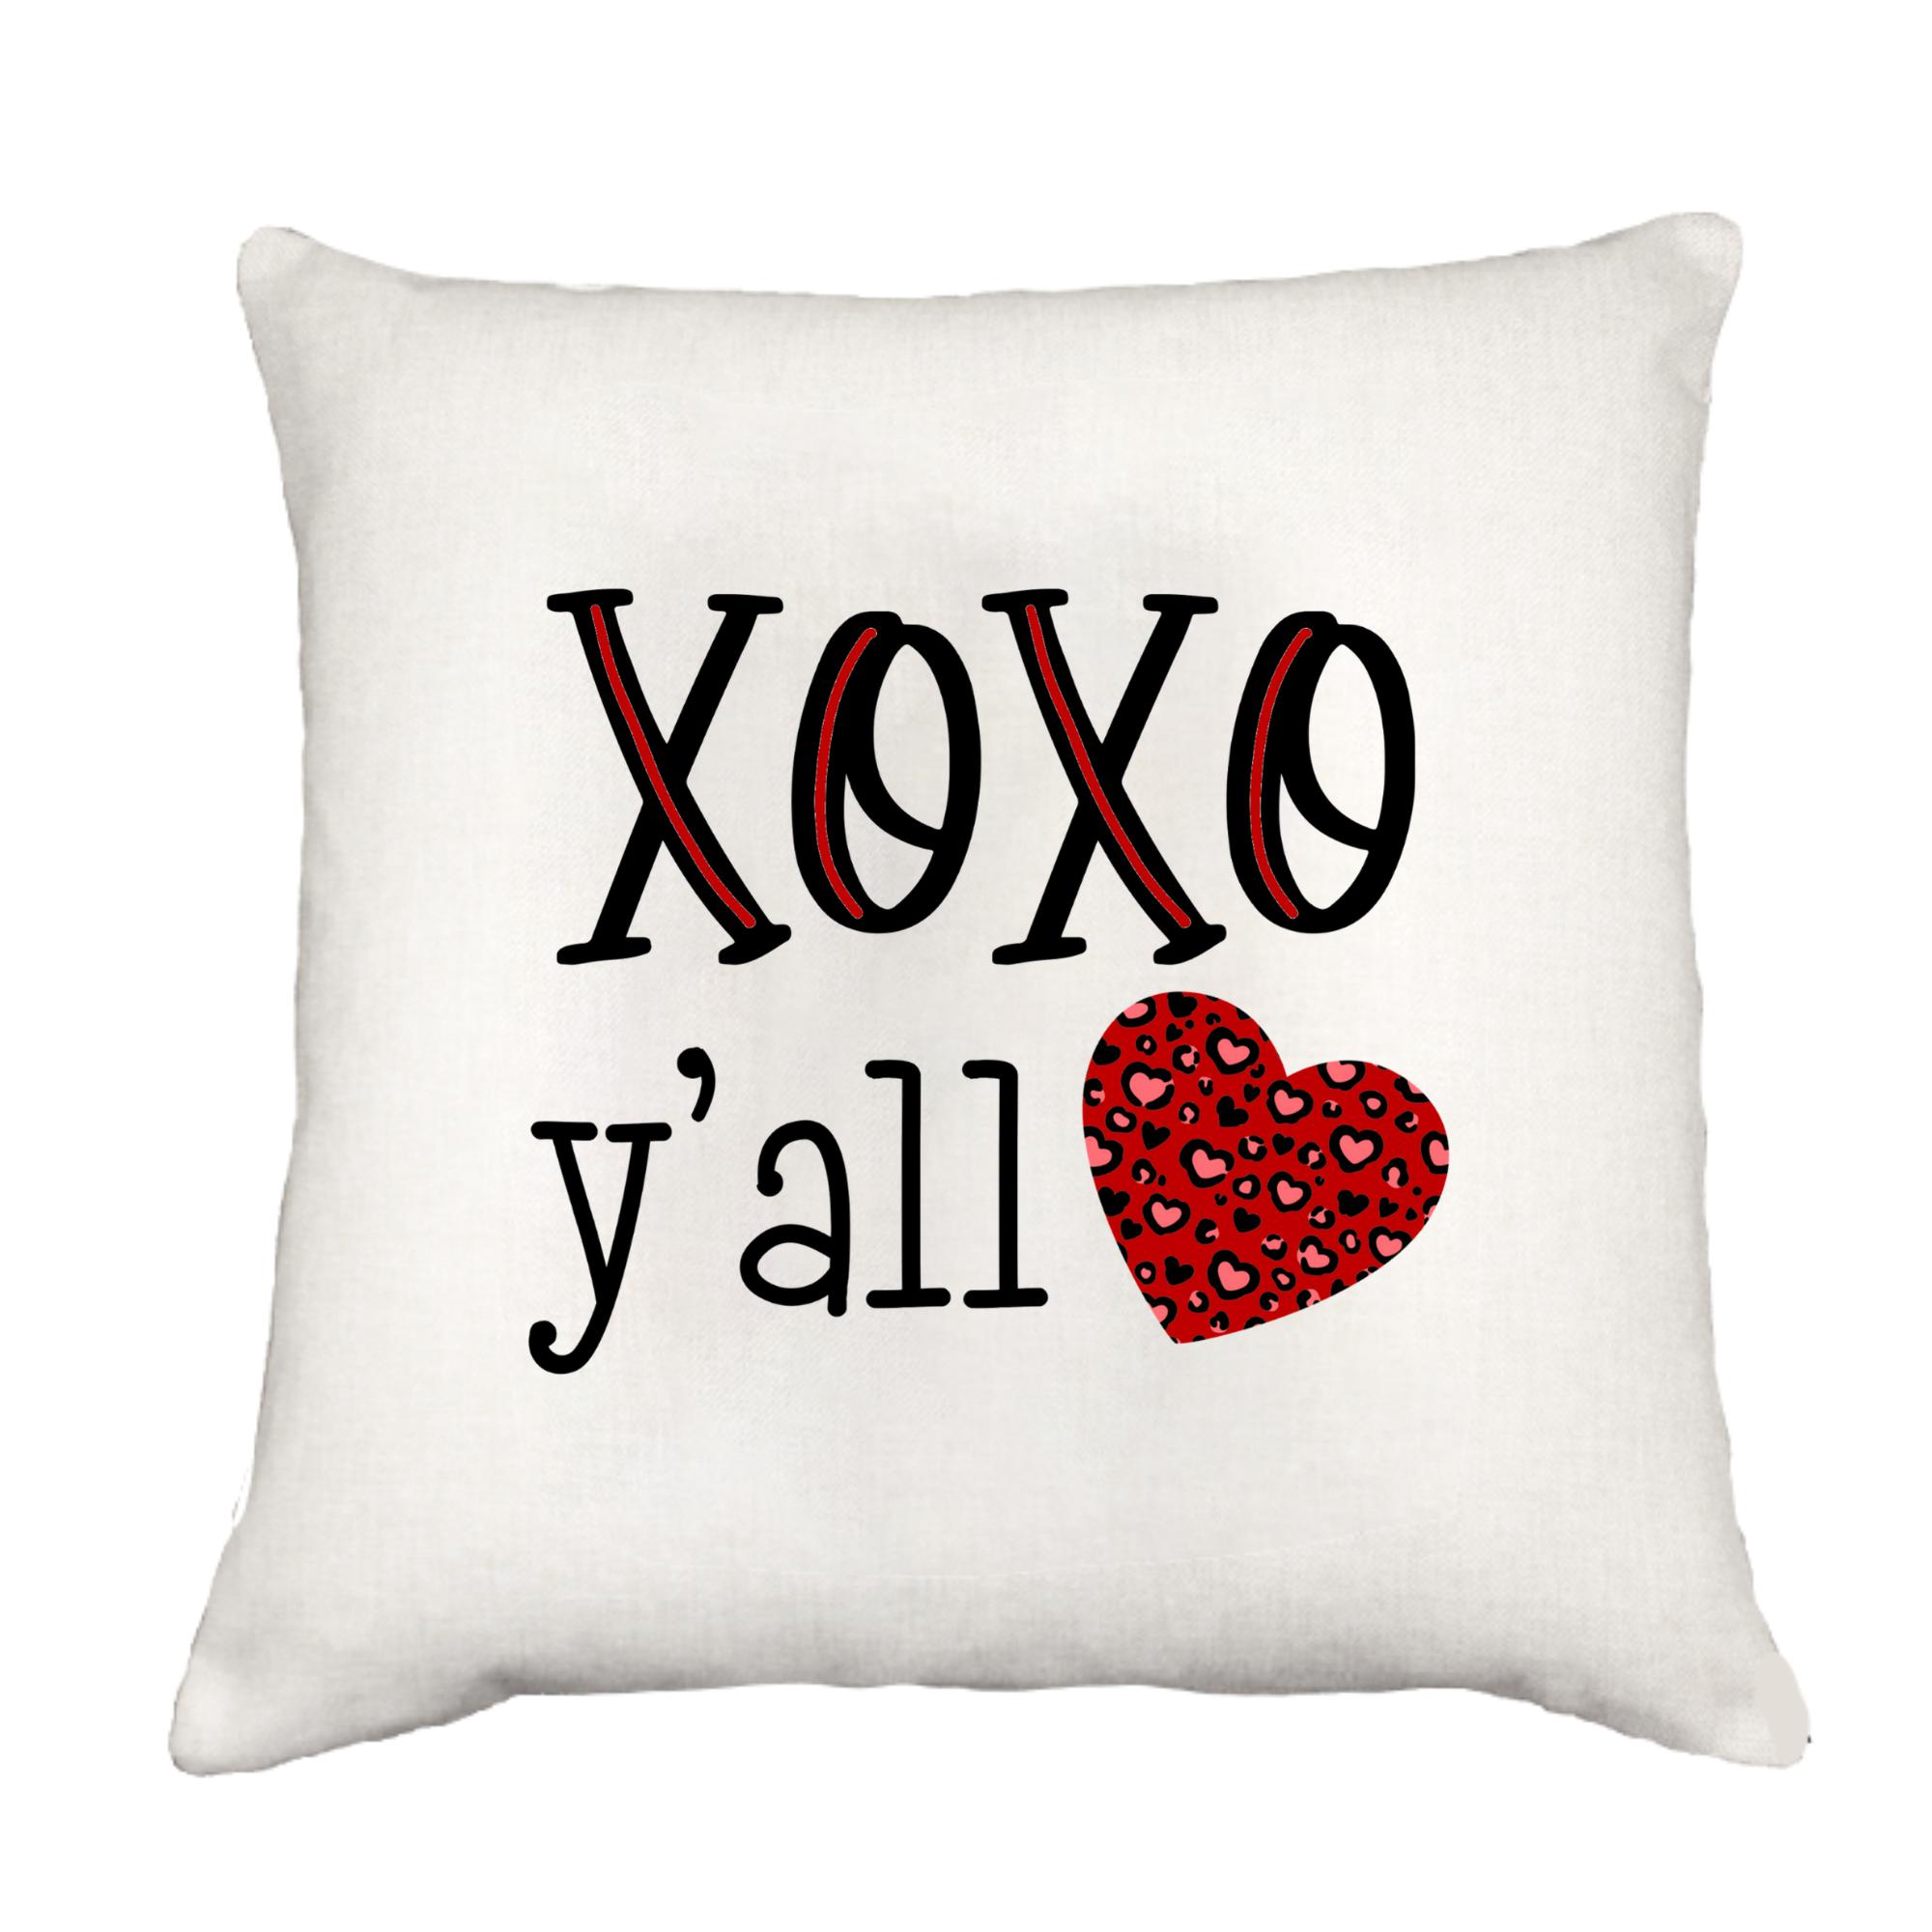 Xoxo Y'all Cottage Pillow Throw/Decorative Pillow - Southern Sisters